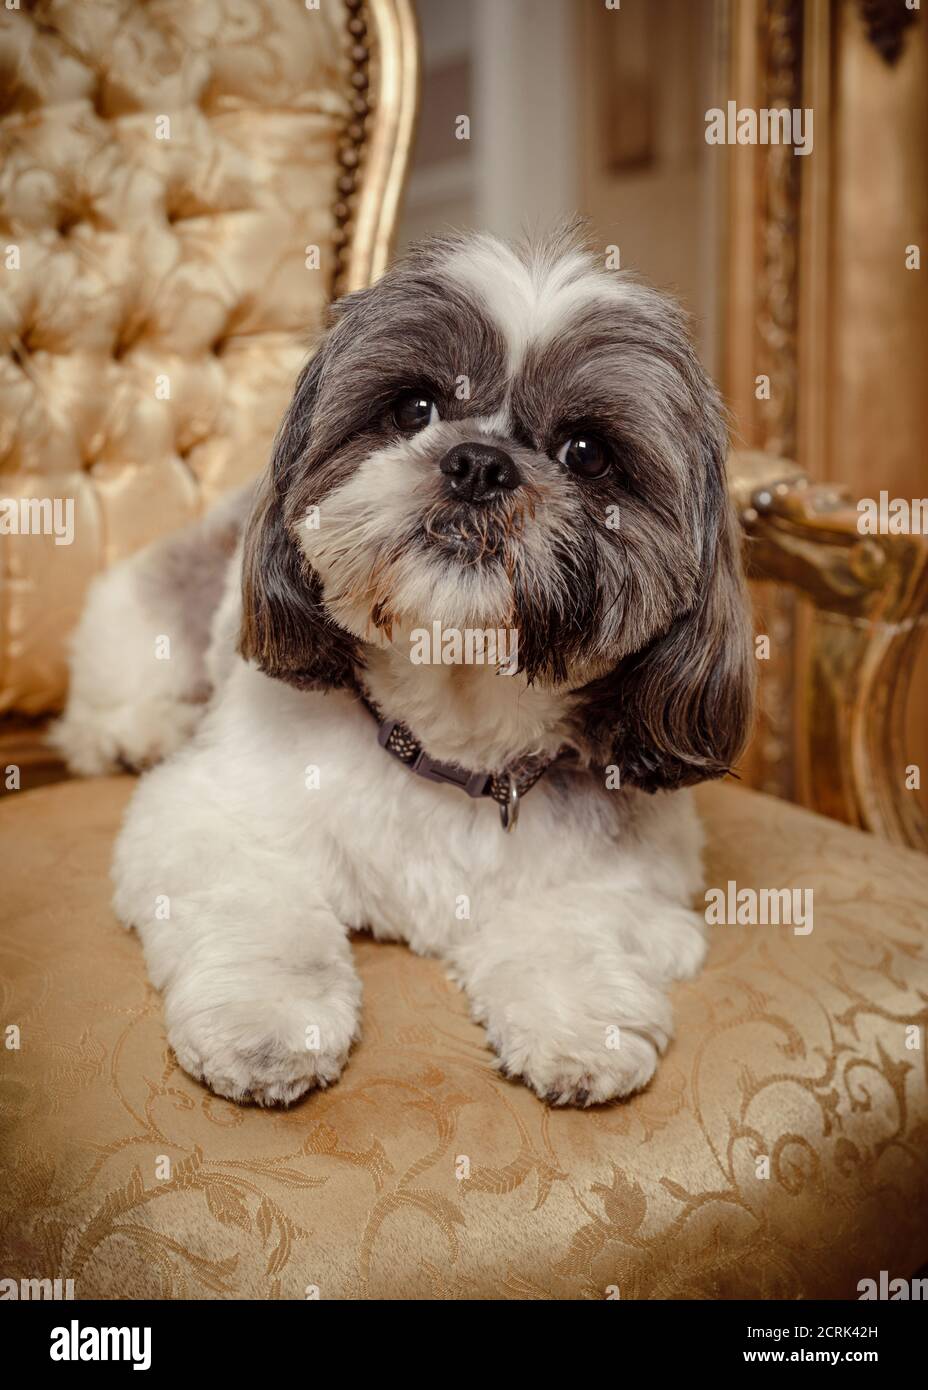 Adorable Shih Tzu pedigree dog lying on a gold chair looking at the viewer Stock Photo